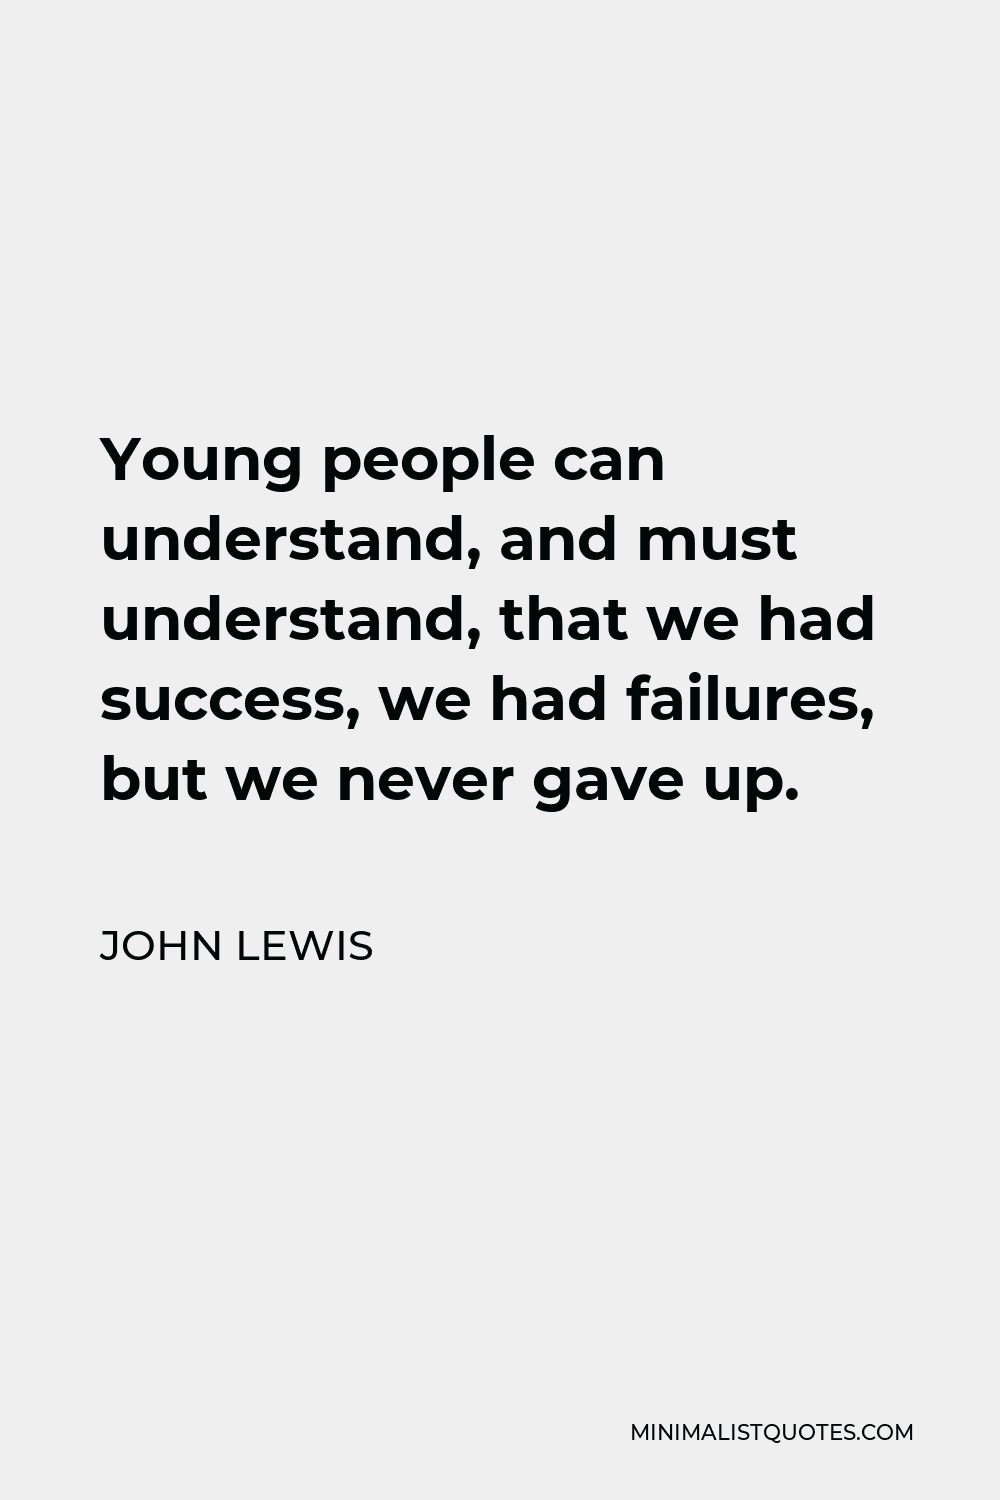 John Lewis Quote - Young people can understand, and must understand, that we had success, we had failures, but we never gave up.